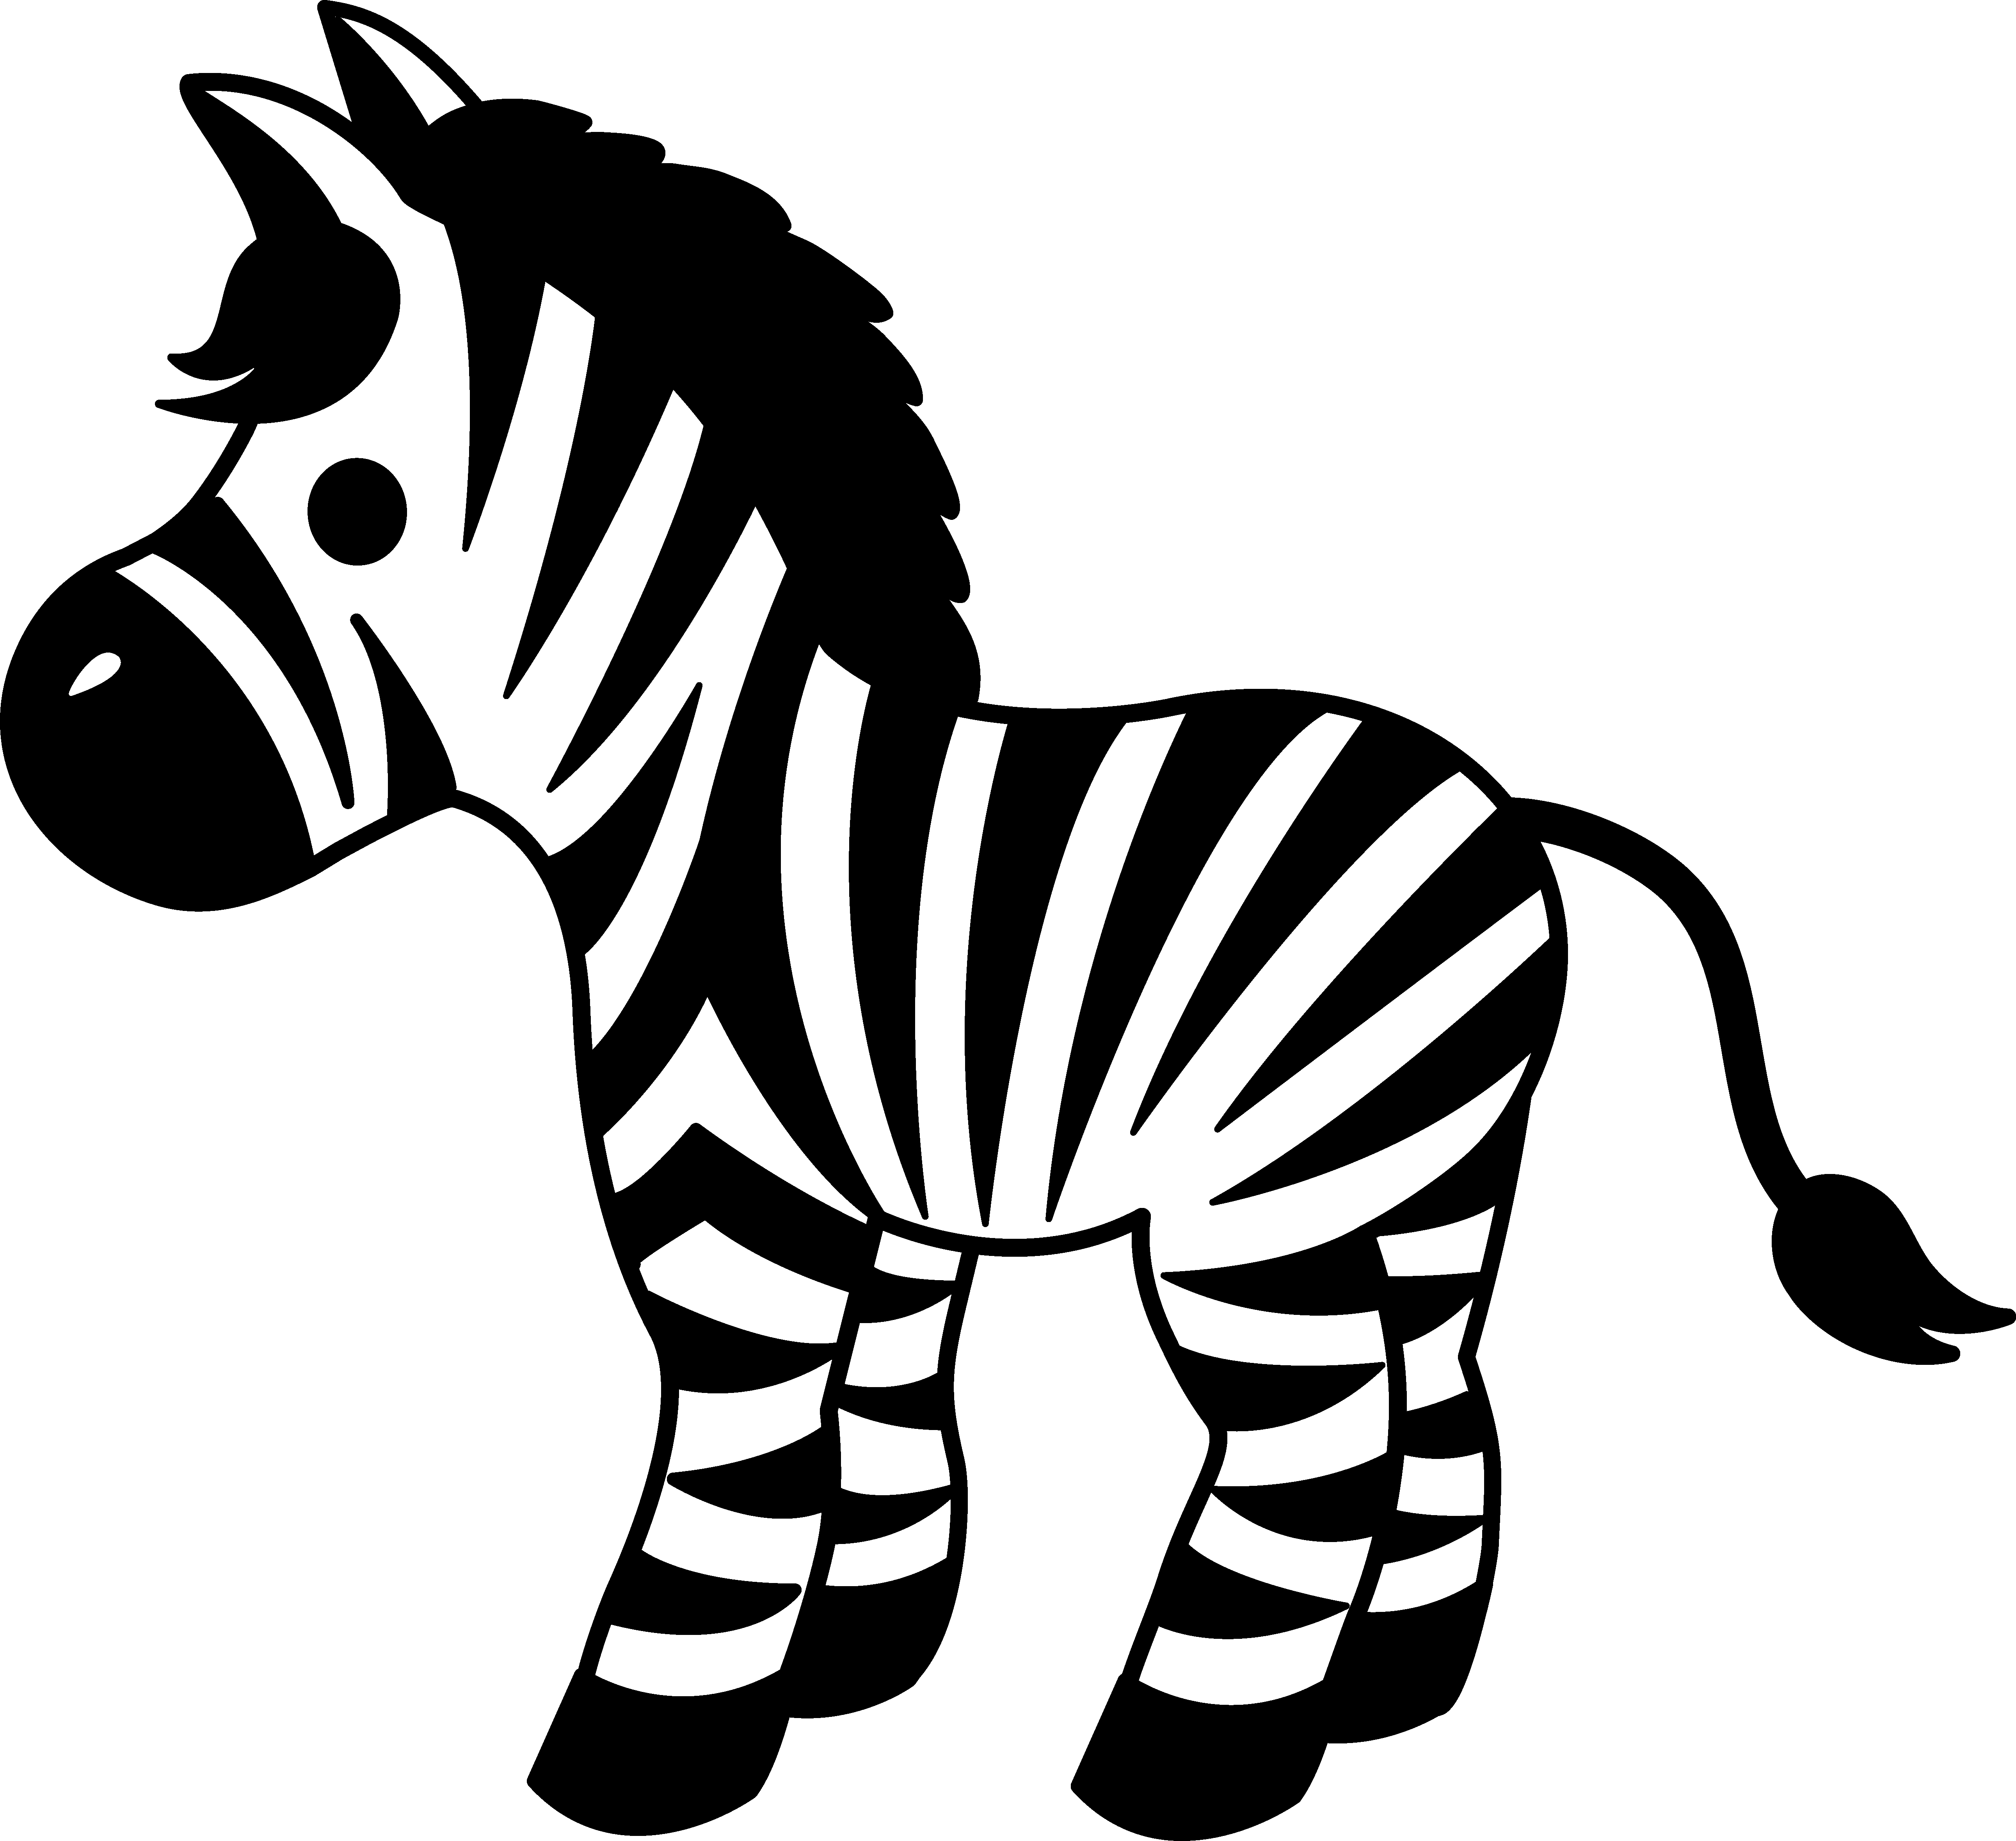 Cute baby zebra at. Drawing clipart drawing